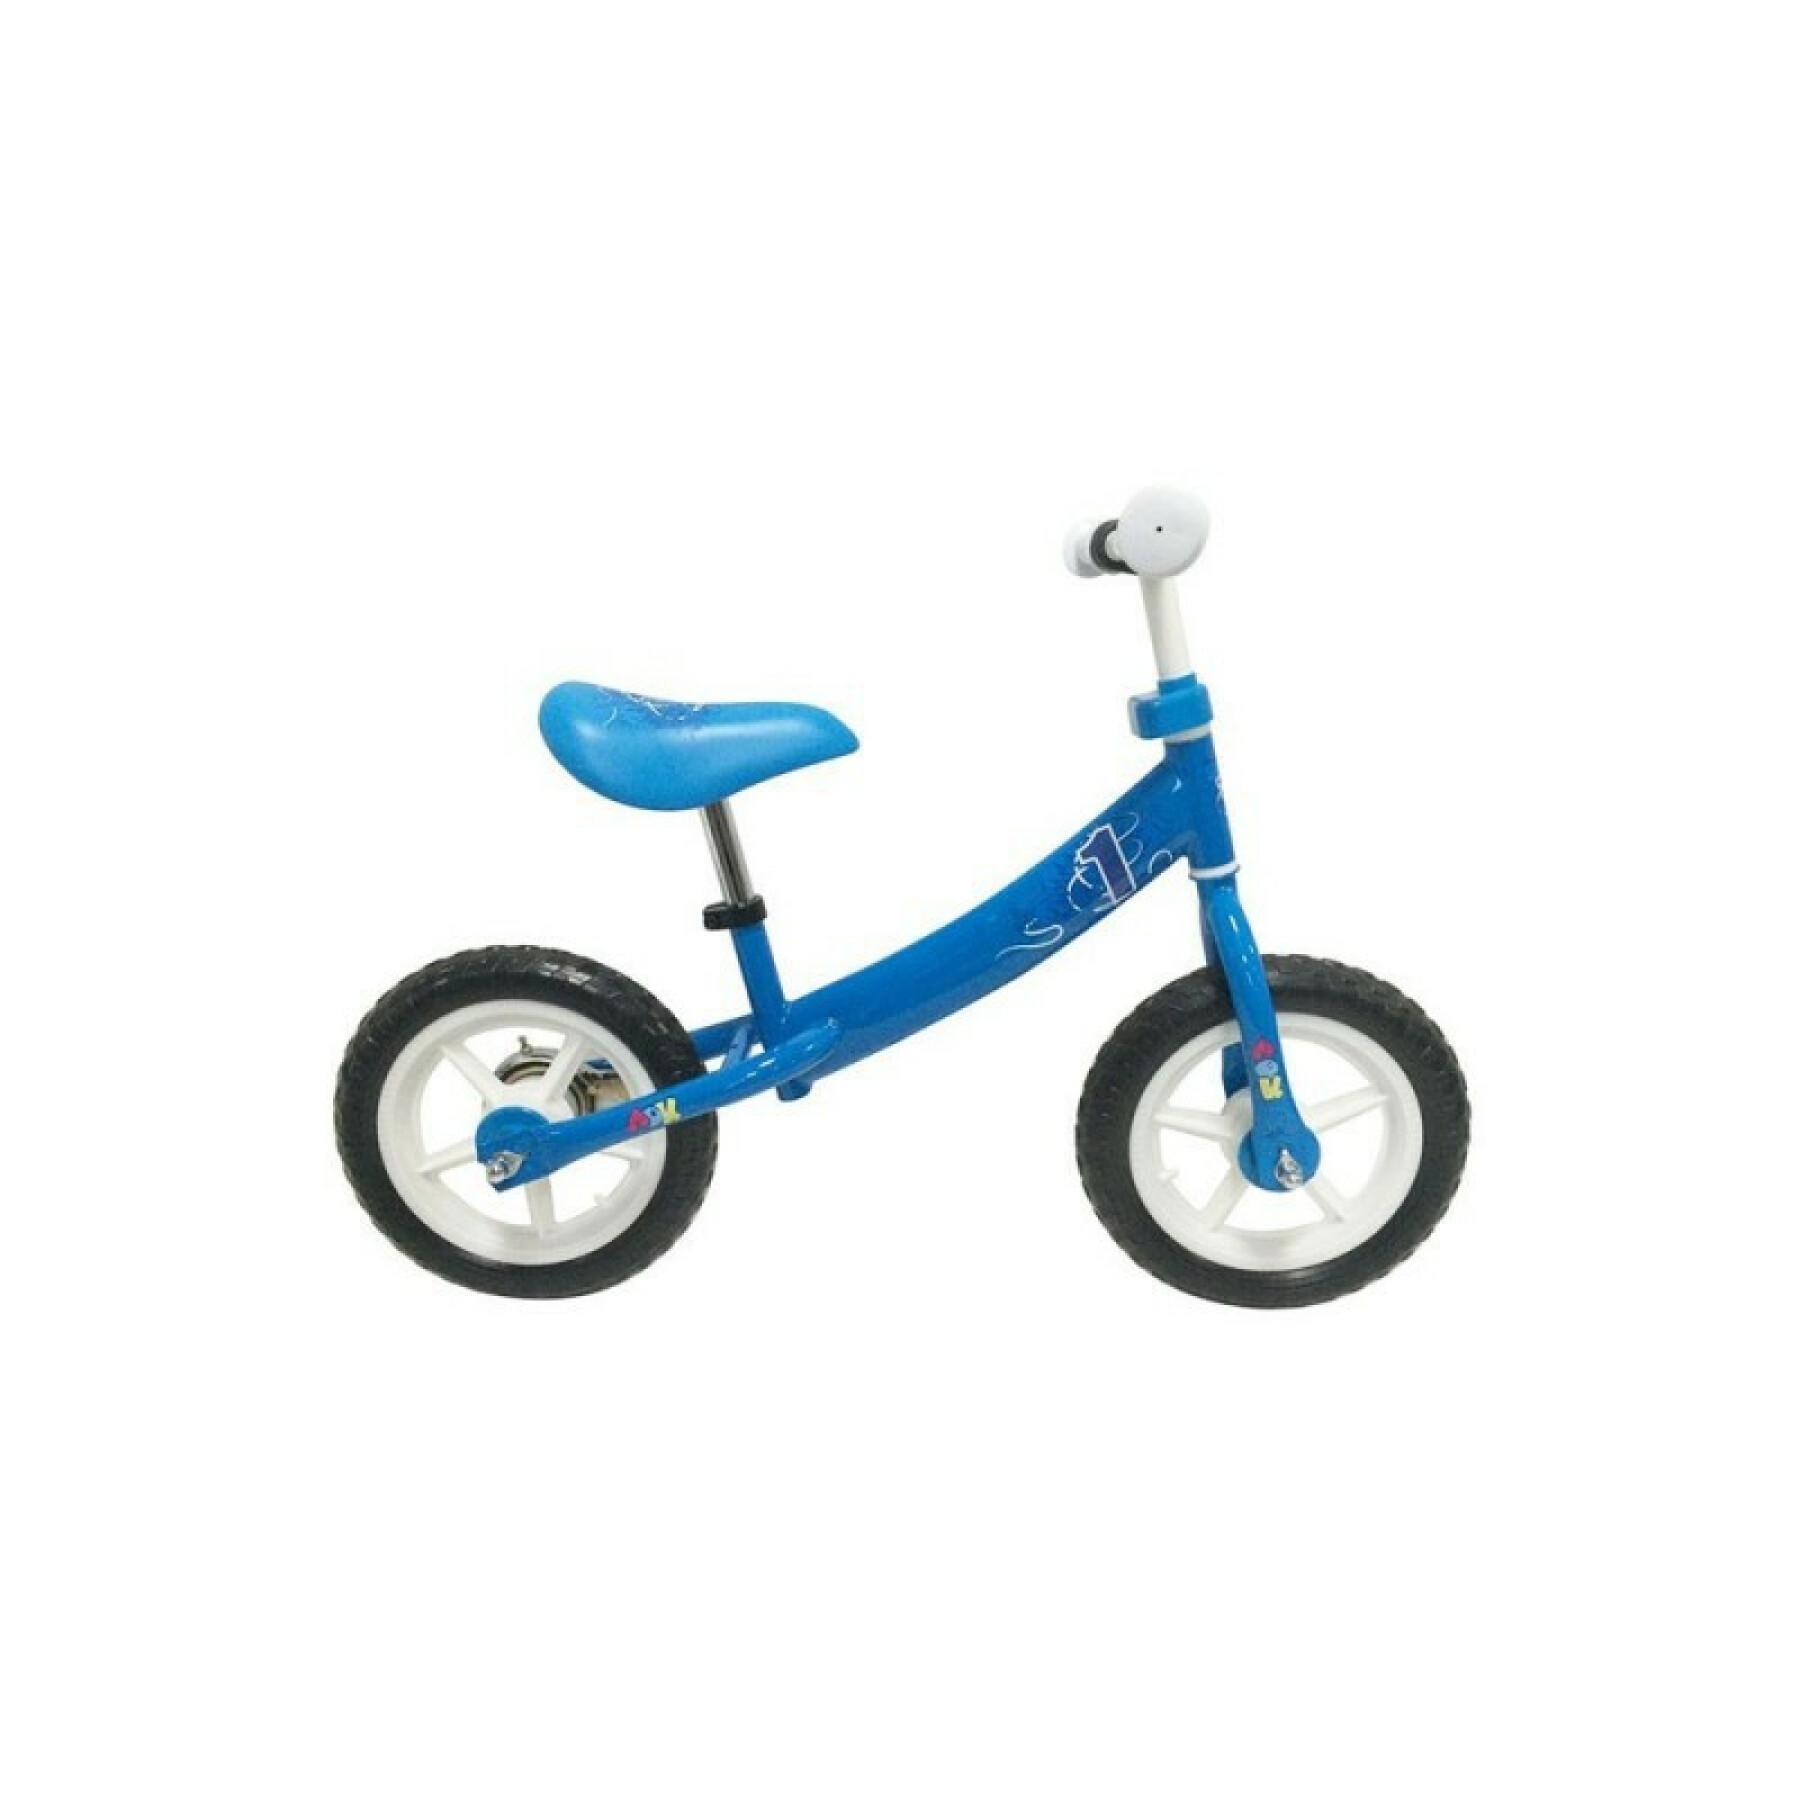 Children's scooter Aok